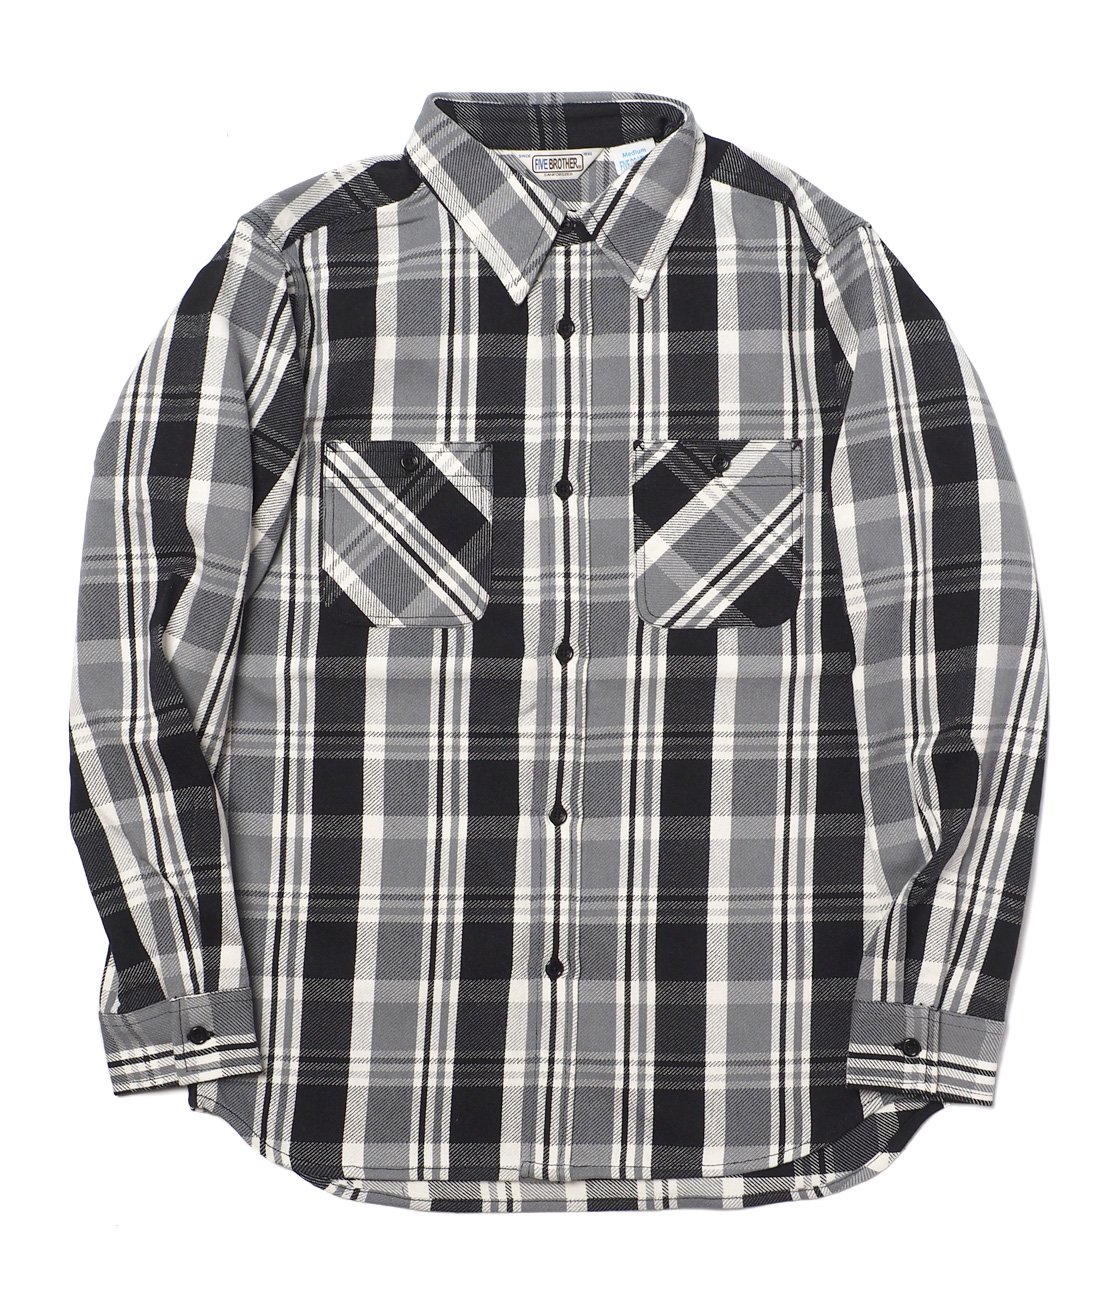 FIVE BROTHER】HEAVY FLANNEL WORK SHIRT - BLACK CHECK